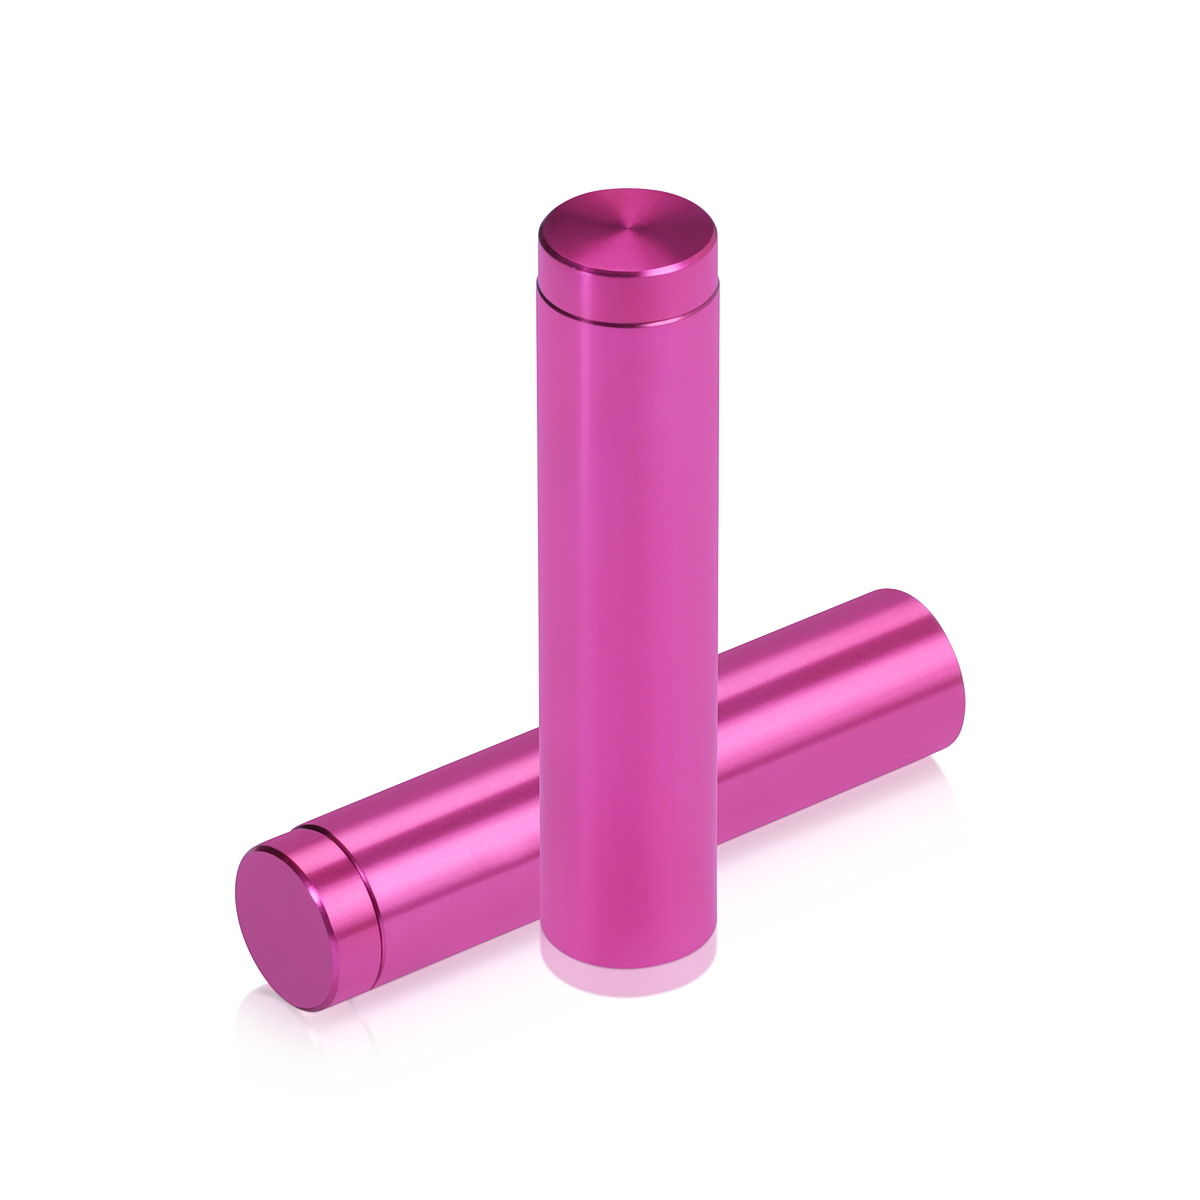 1/2'' Diameter X 2'' Barrel Length, Affordable Aluminum Standoffs, Rosy Pink Anodized Finish Easy Fasten Standoff (For Inside / Outside use) [Required Material Hole Size: 3/8'']